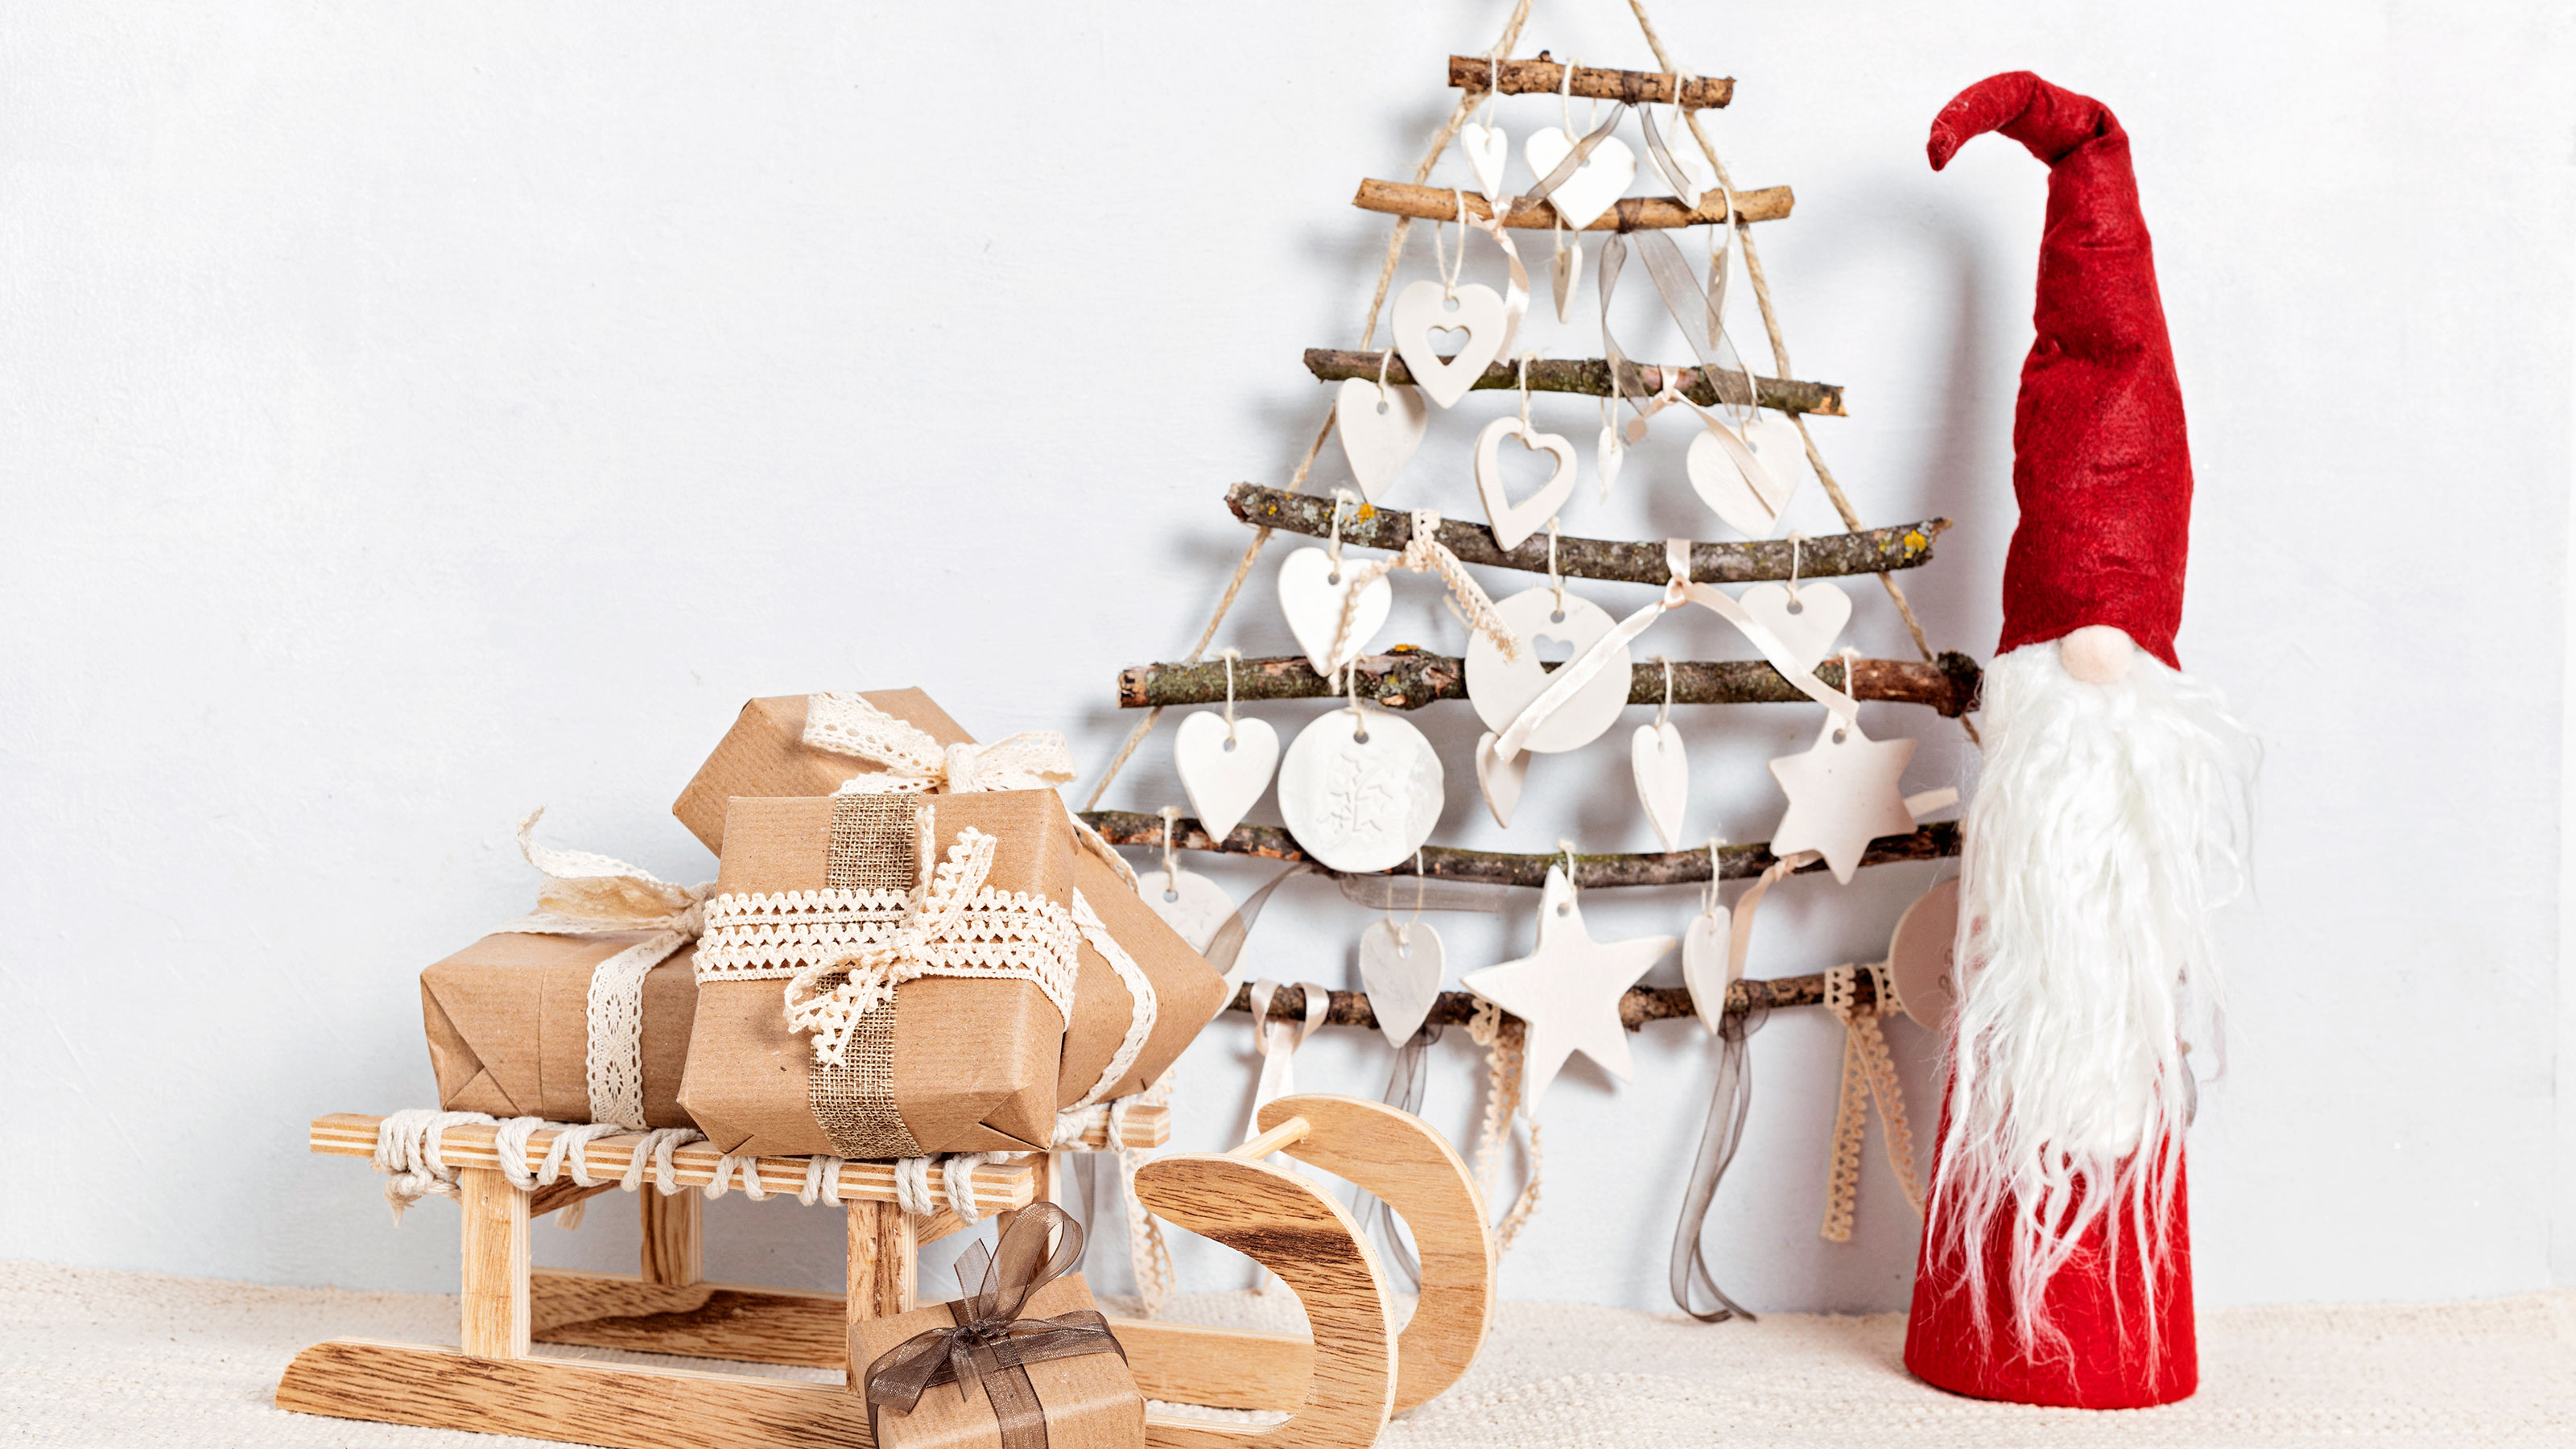 Make Your Own Decorative Christmas Trees